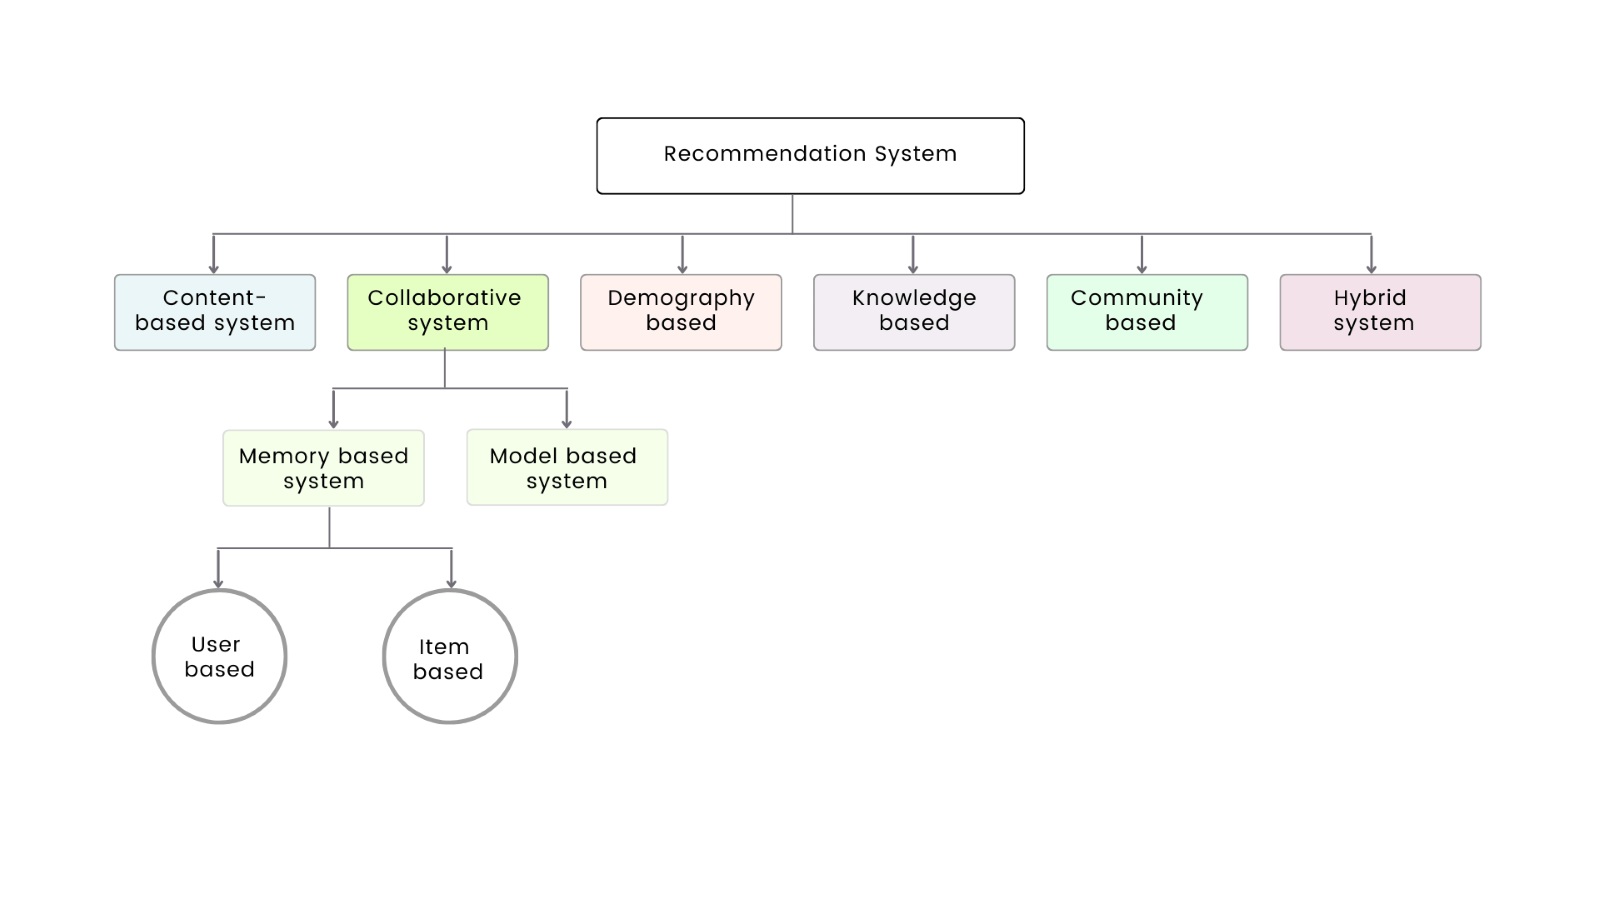 Recommendation system